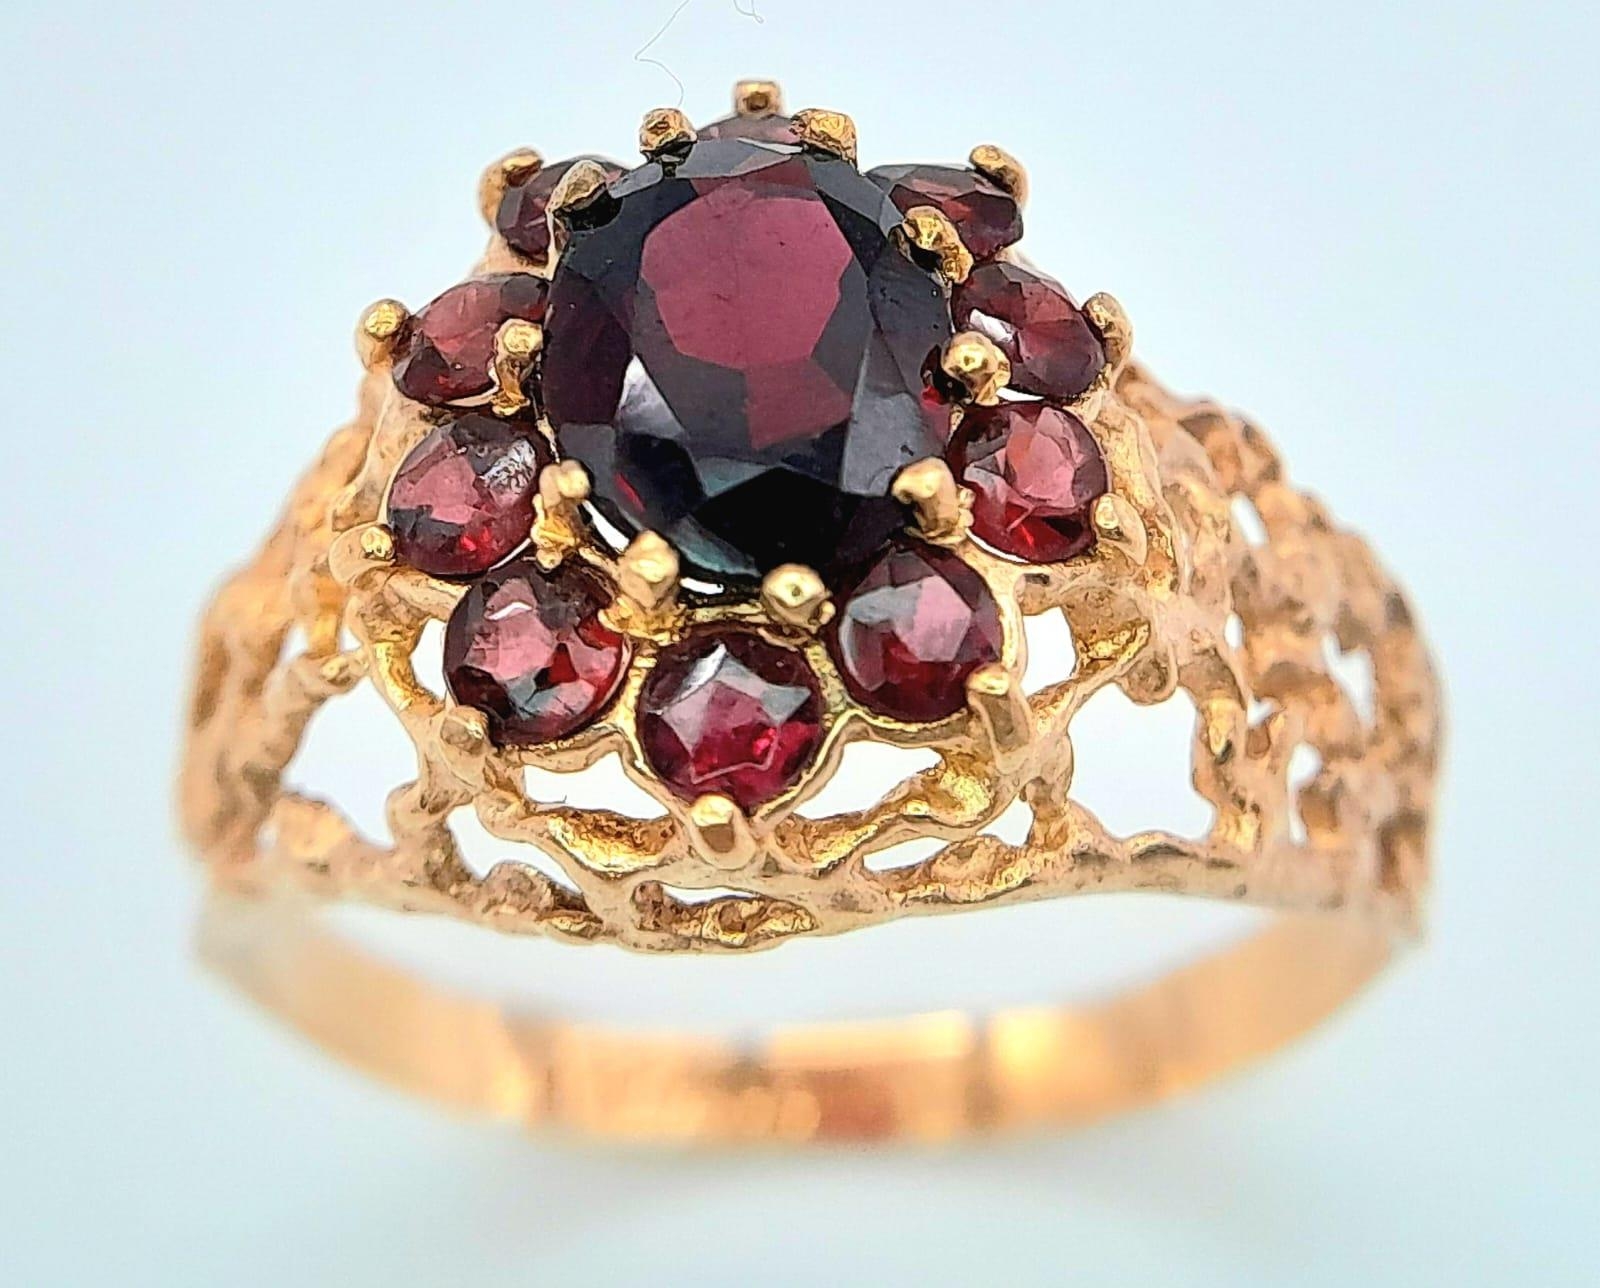 A vintage oval cluster garnet 9ct gold ring surrounded by a halo of bright red garnets in a - Image 4 of 6